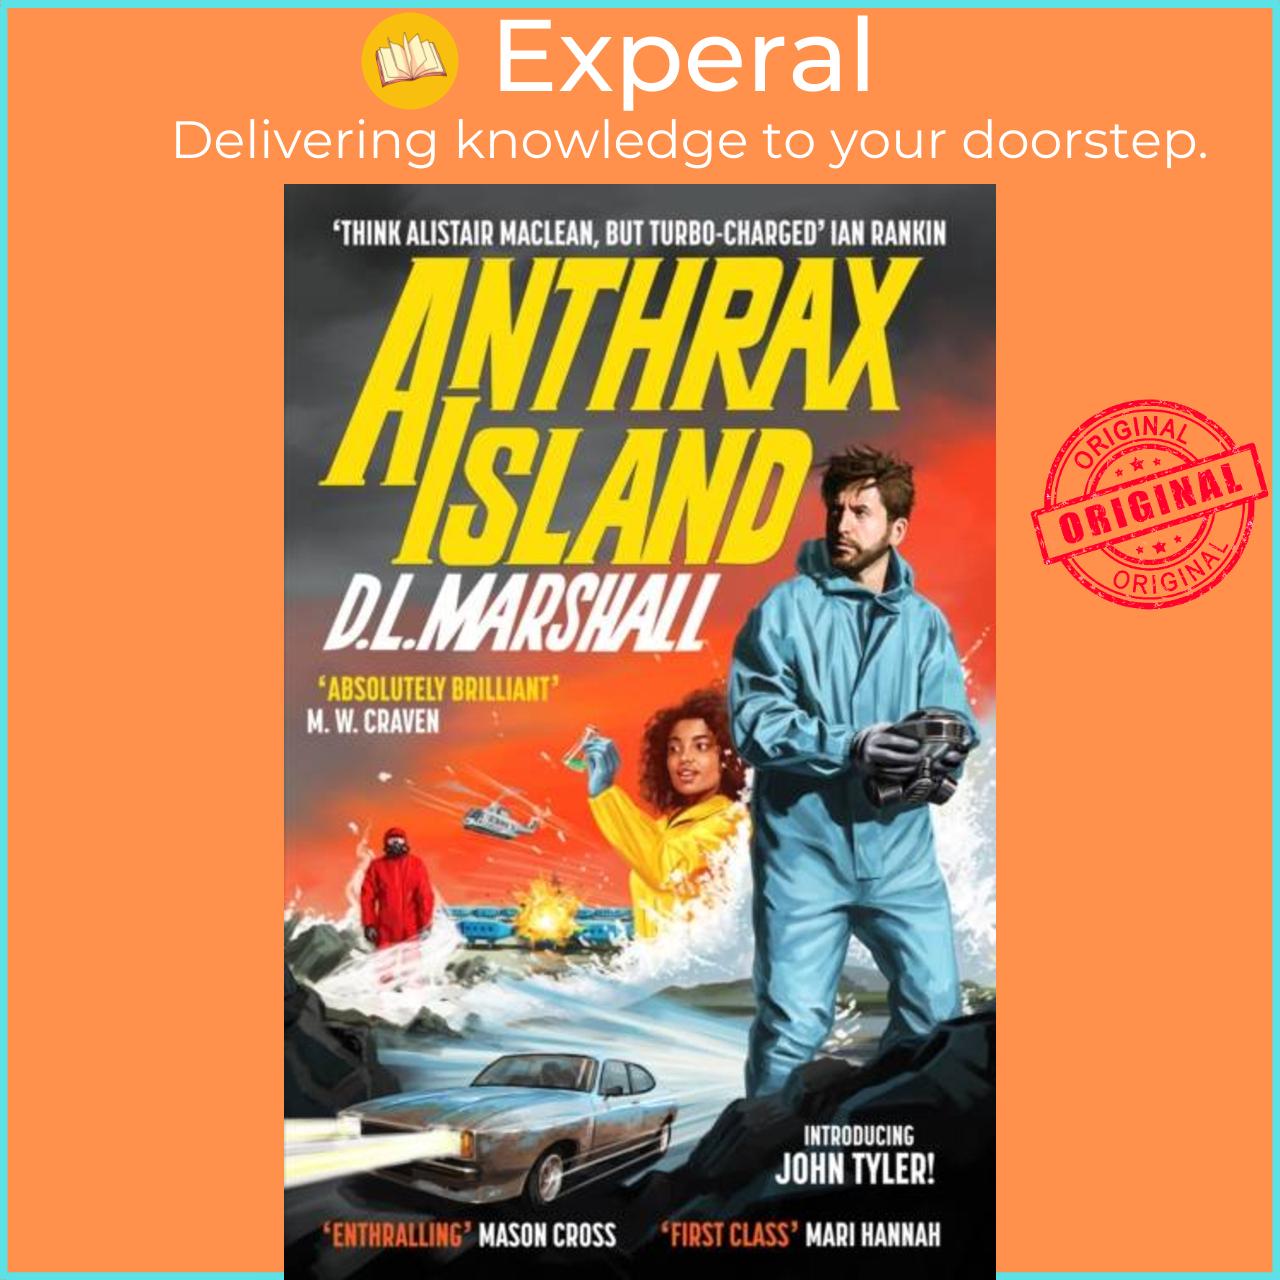 Sách - Anthrax Island by D. L. Marshall (UK edition, paperback)